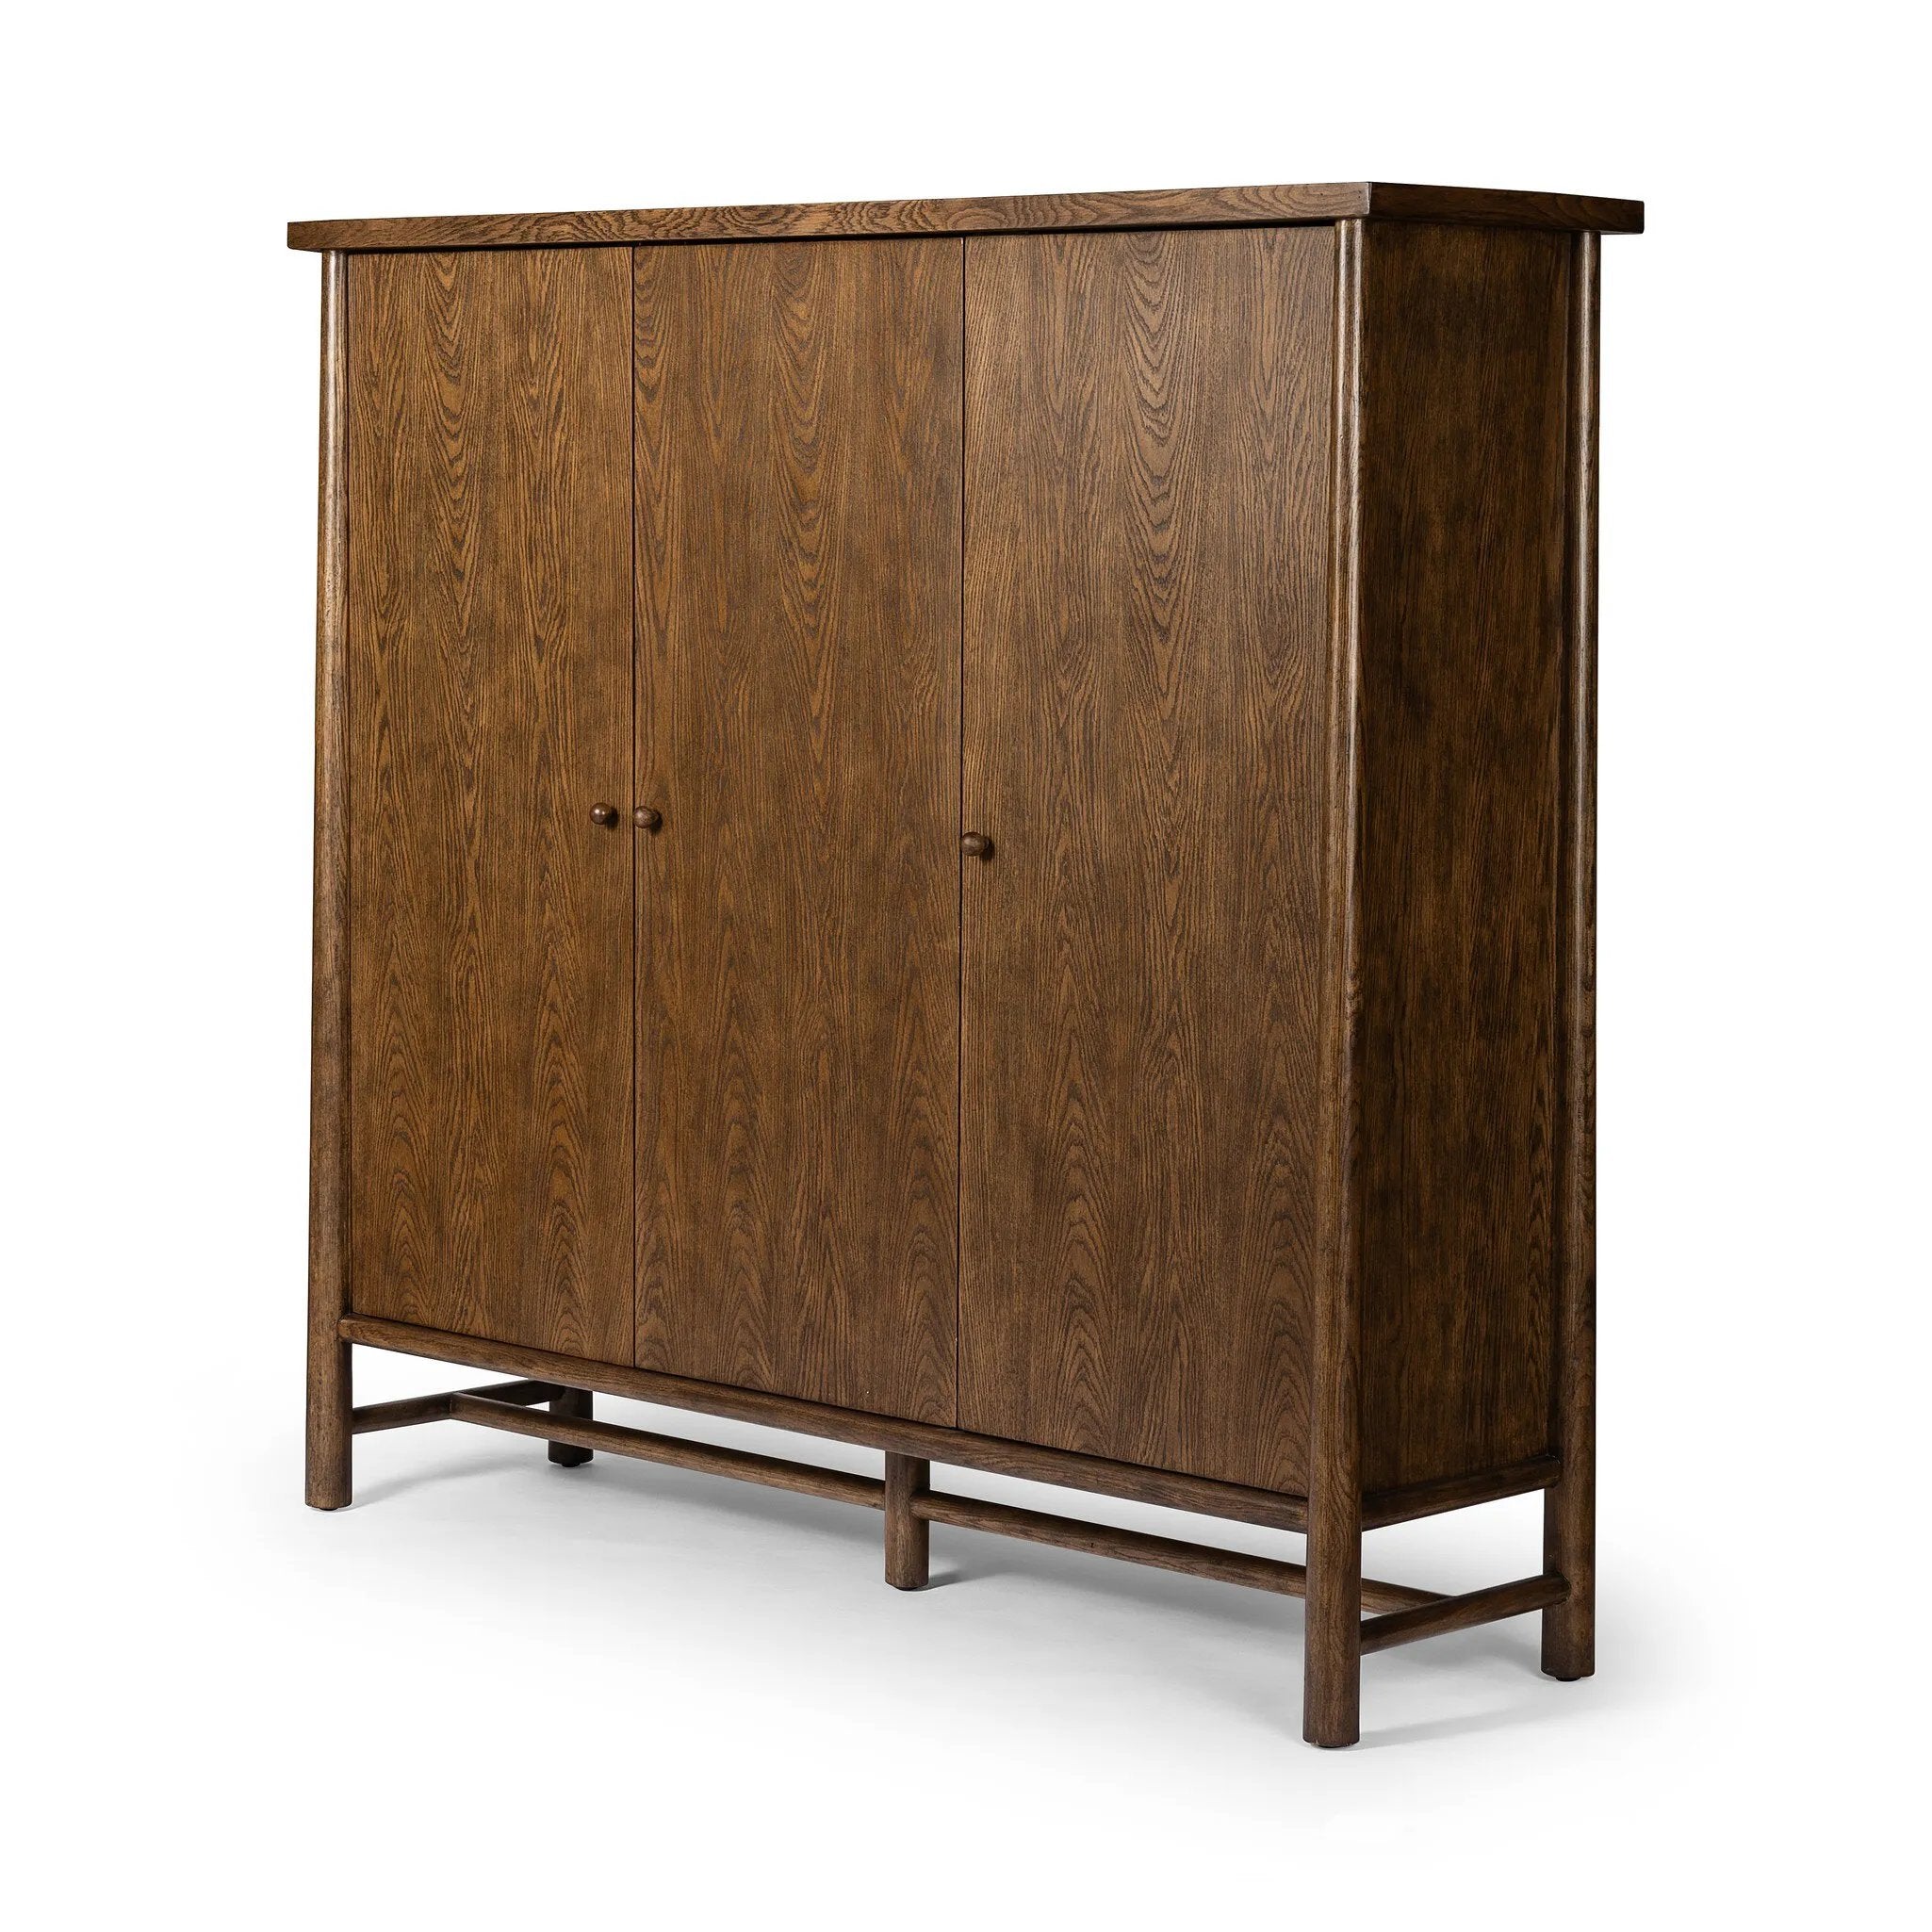 A beautifully simple statement piece. This three-door cabinet is crafted from a mix of solid oak and veneer in a dark toasted finish. Details include subtle, tapered corner posts and minimal rounded door knobs.Collection: Well Amethyst Home provides interior design, new home construction design consulting, vintage area rugs, and lighting in the Boston metro area.